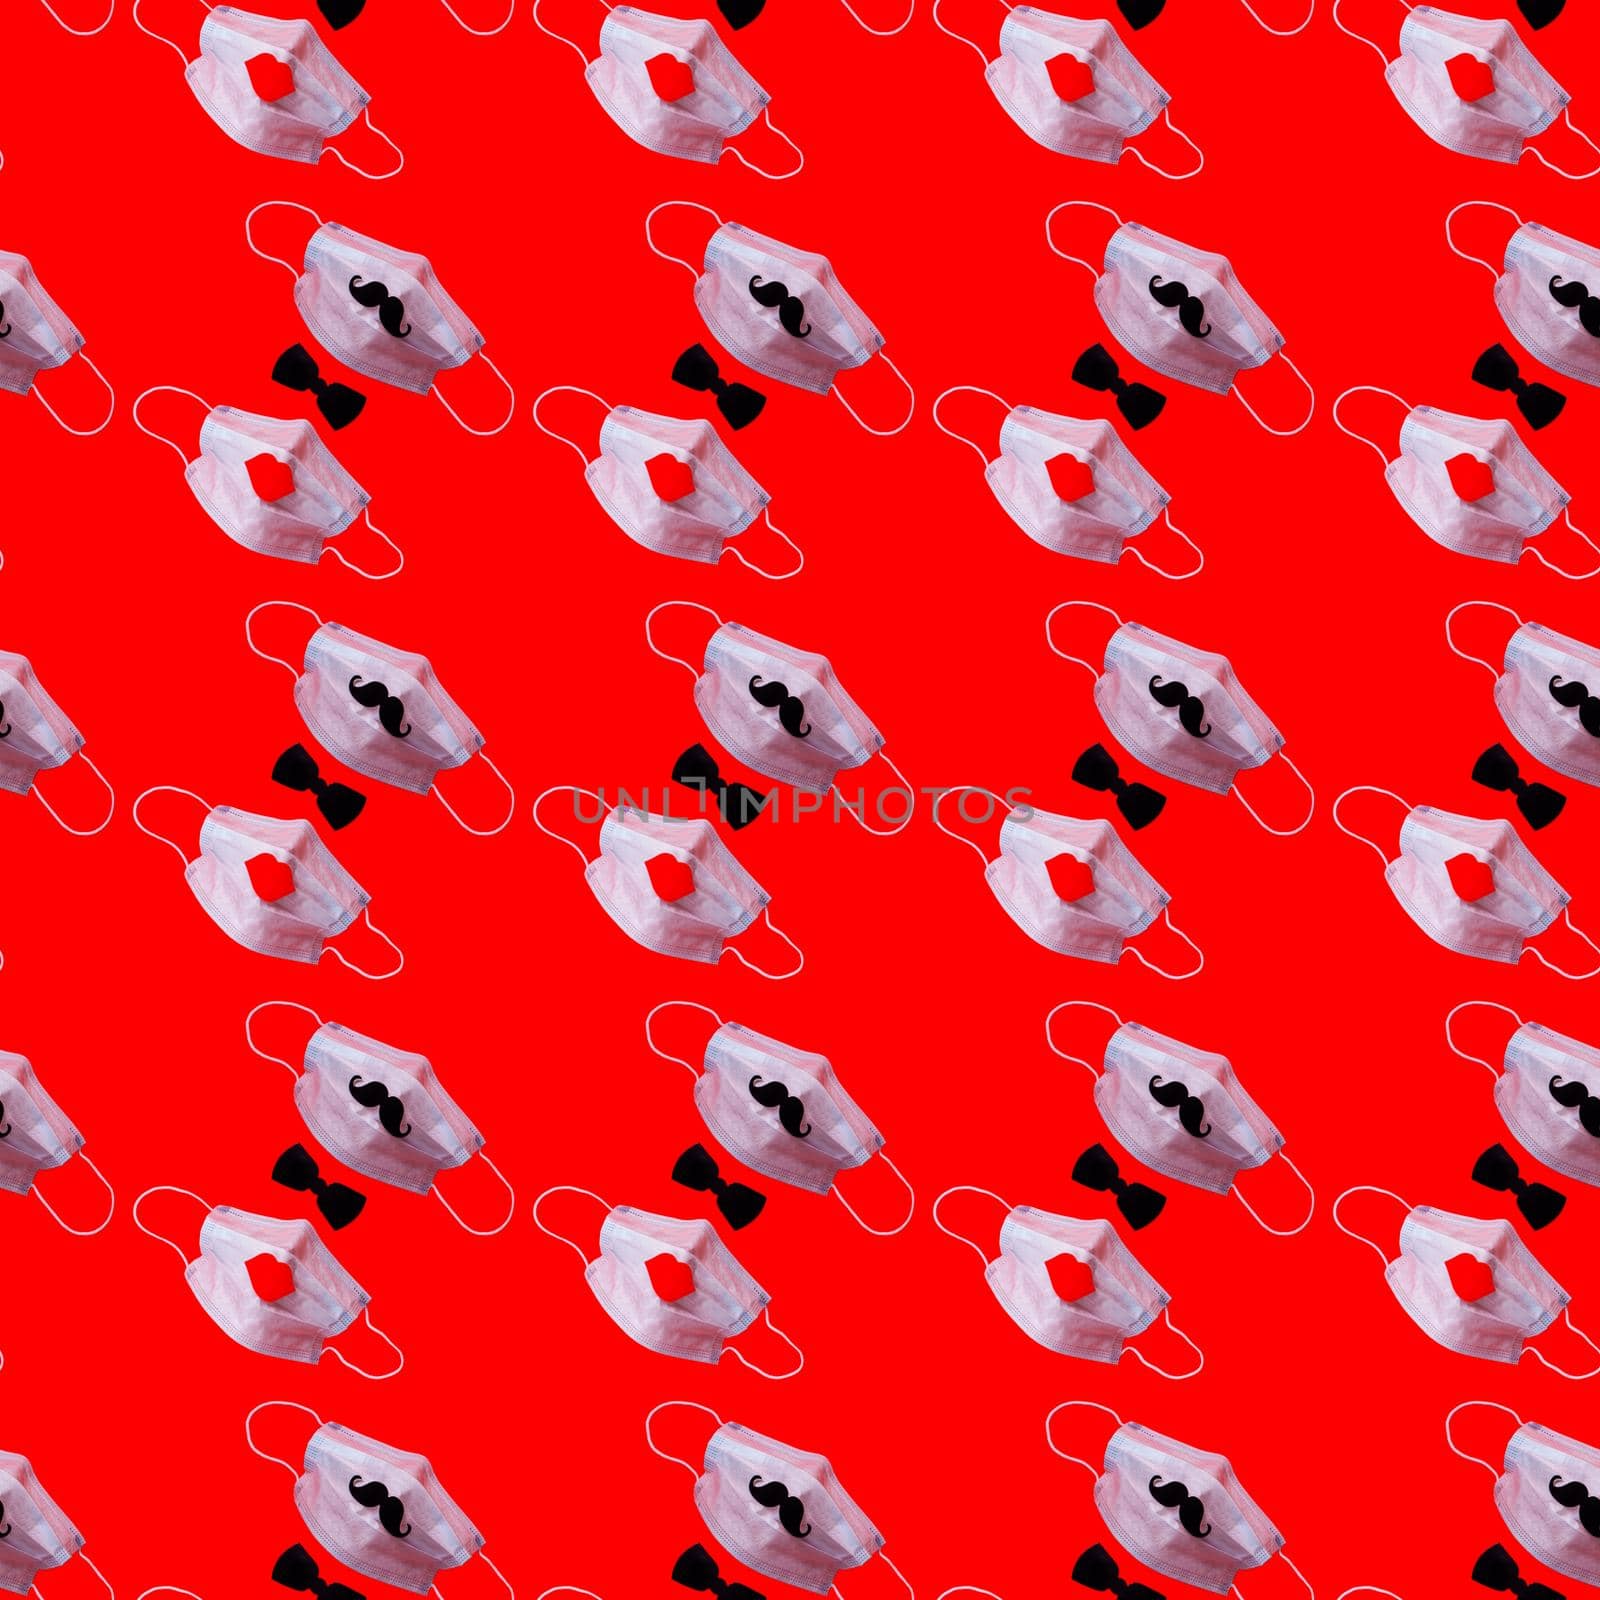 Surgical mask for the face of a gentleman and lady on a red background. Seamless medical pattern. by bySergPo